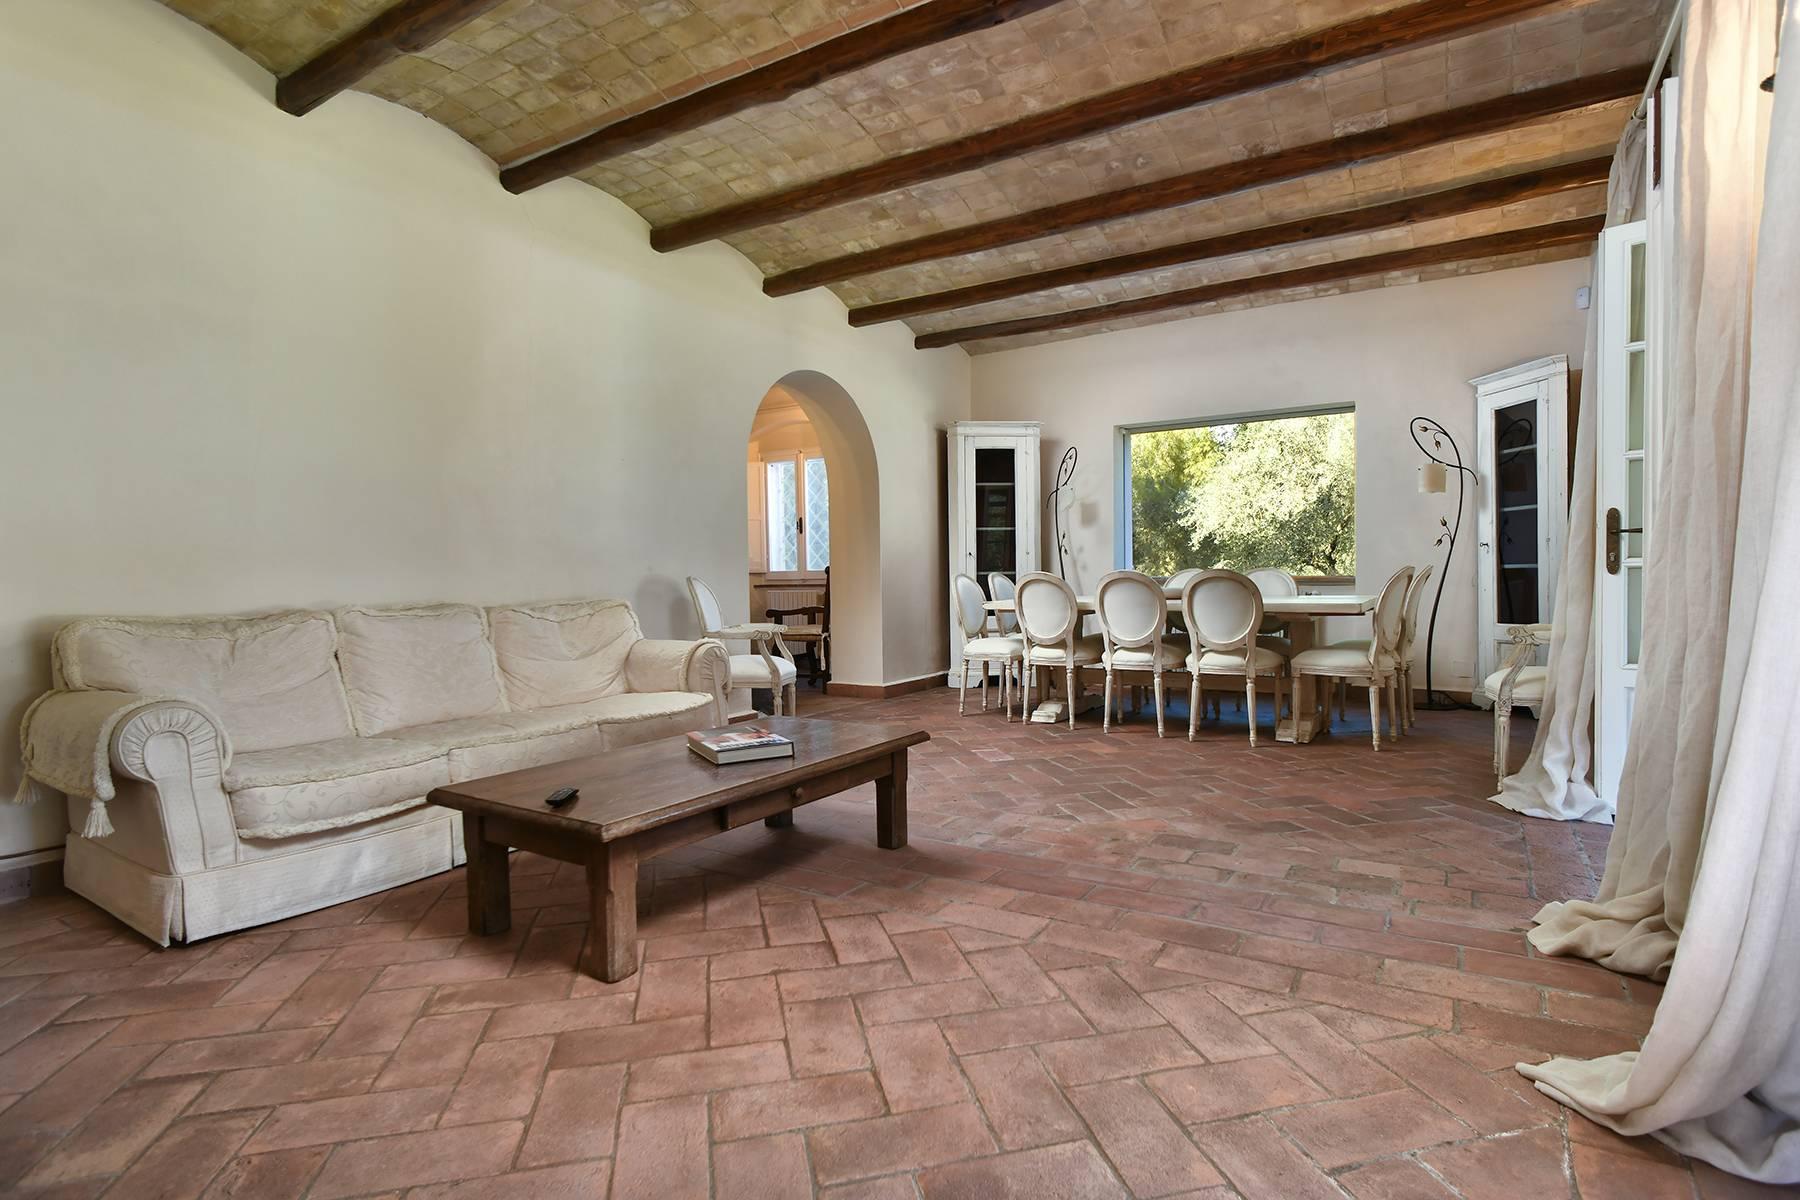 Exclusive beach house in Tuscany close to the sea - 16